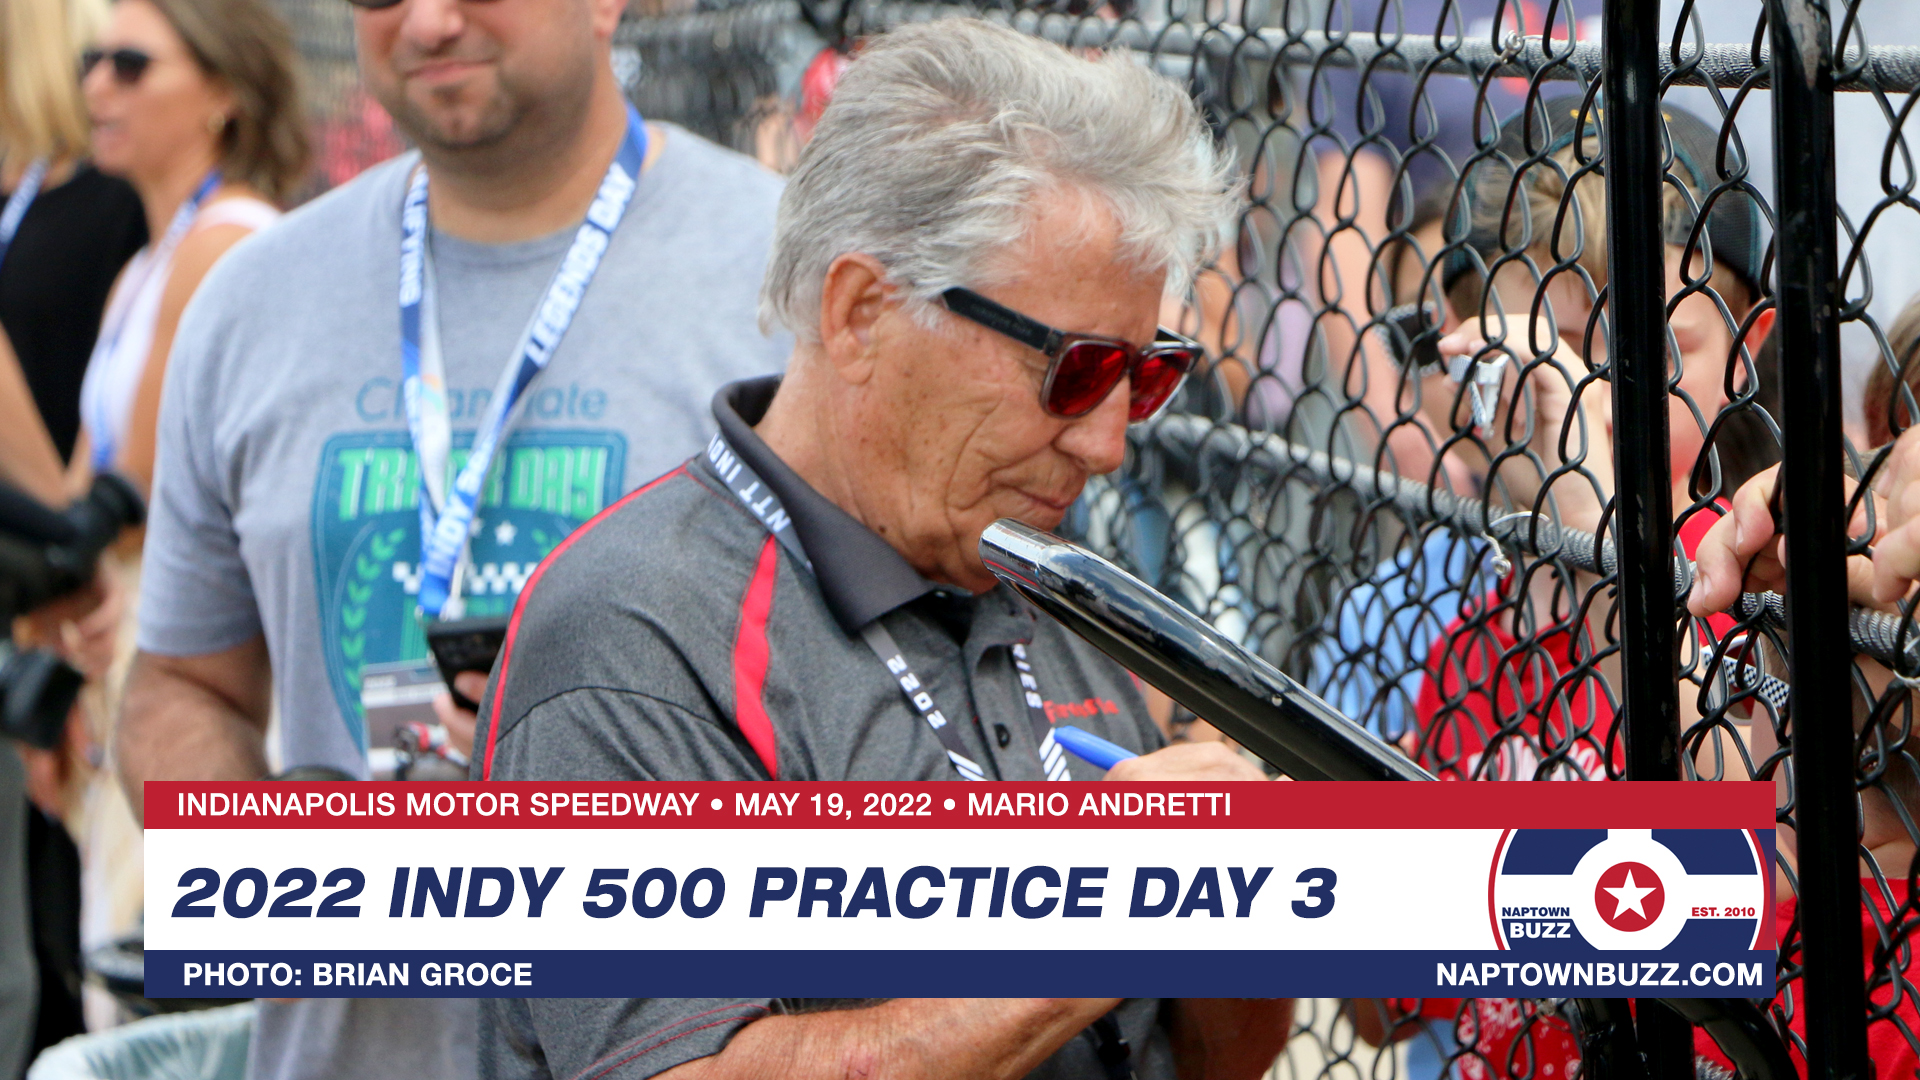 Mario Andretti on Indy 500 Practice Day 3 at Indianapolis Motor Speedway on May 19, 2022